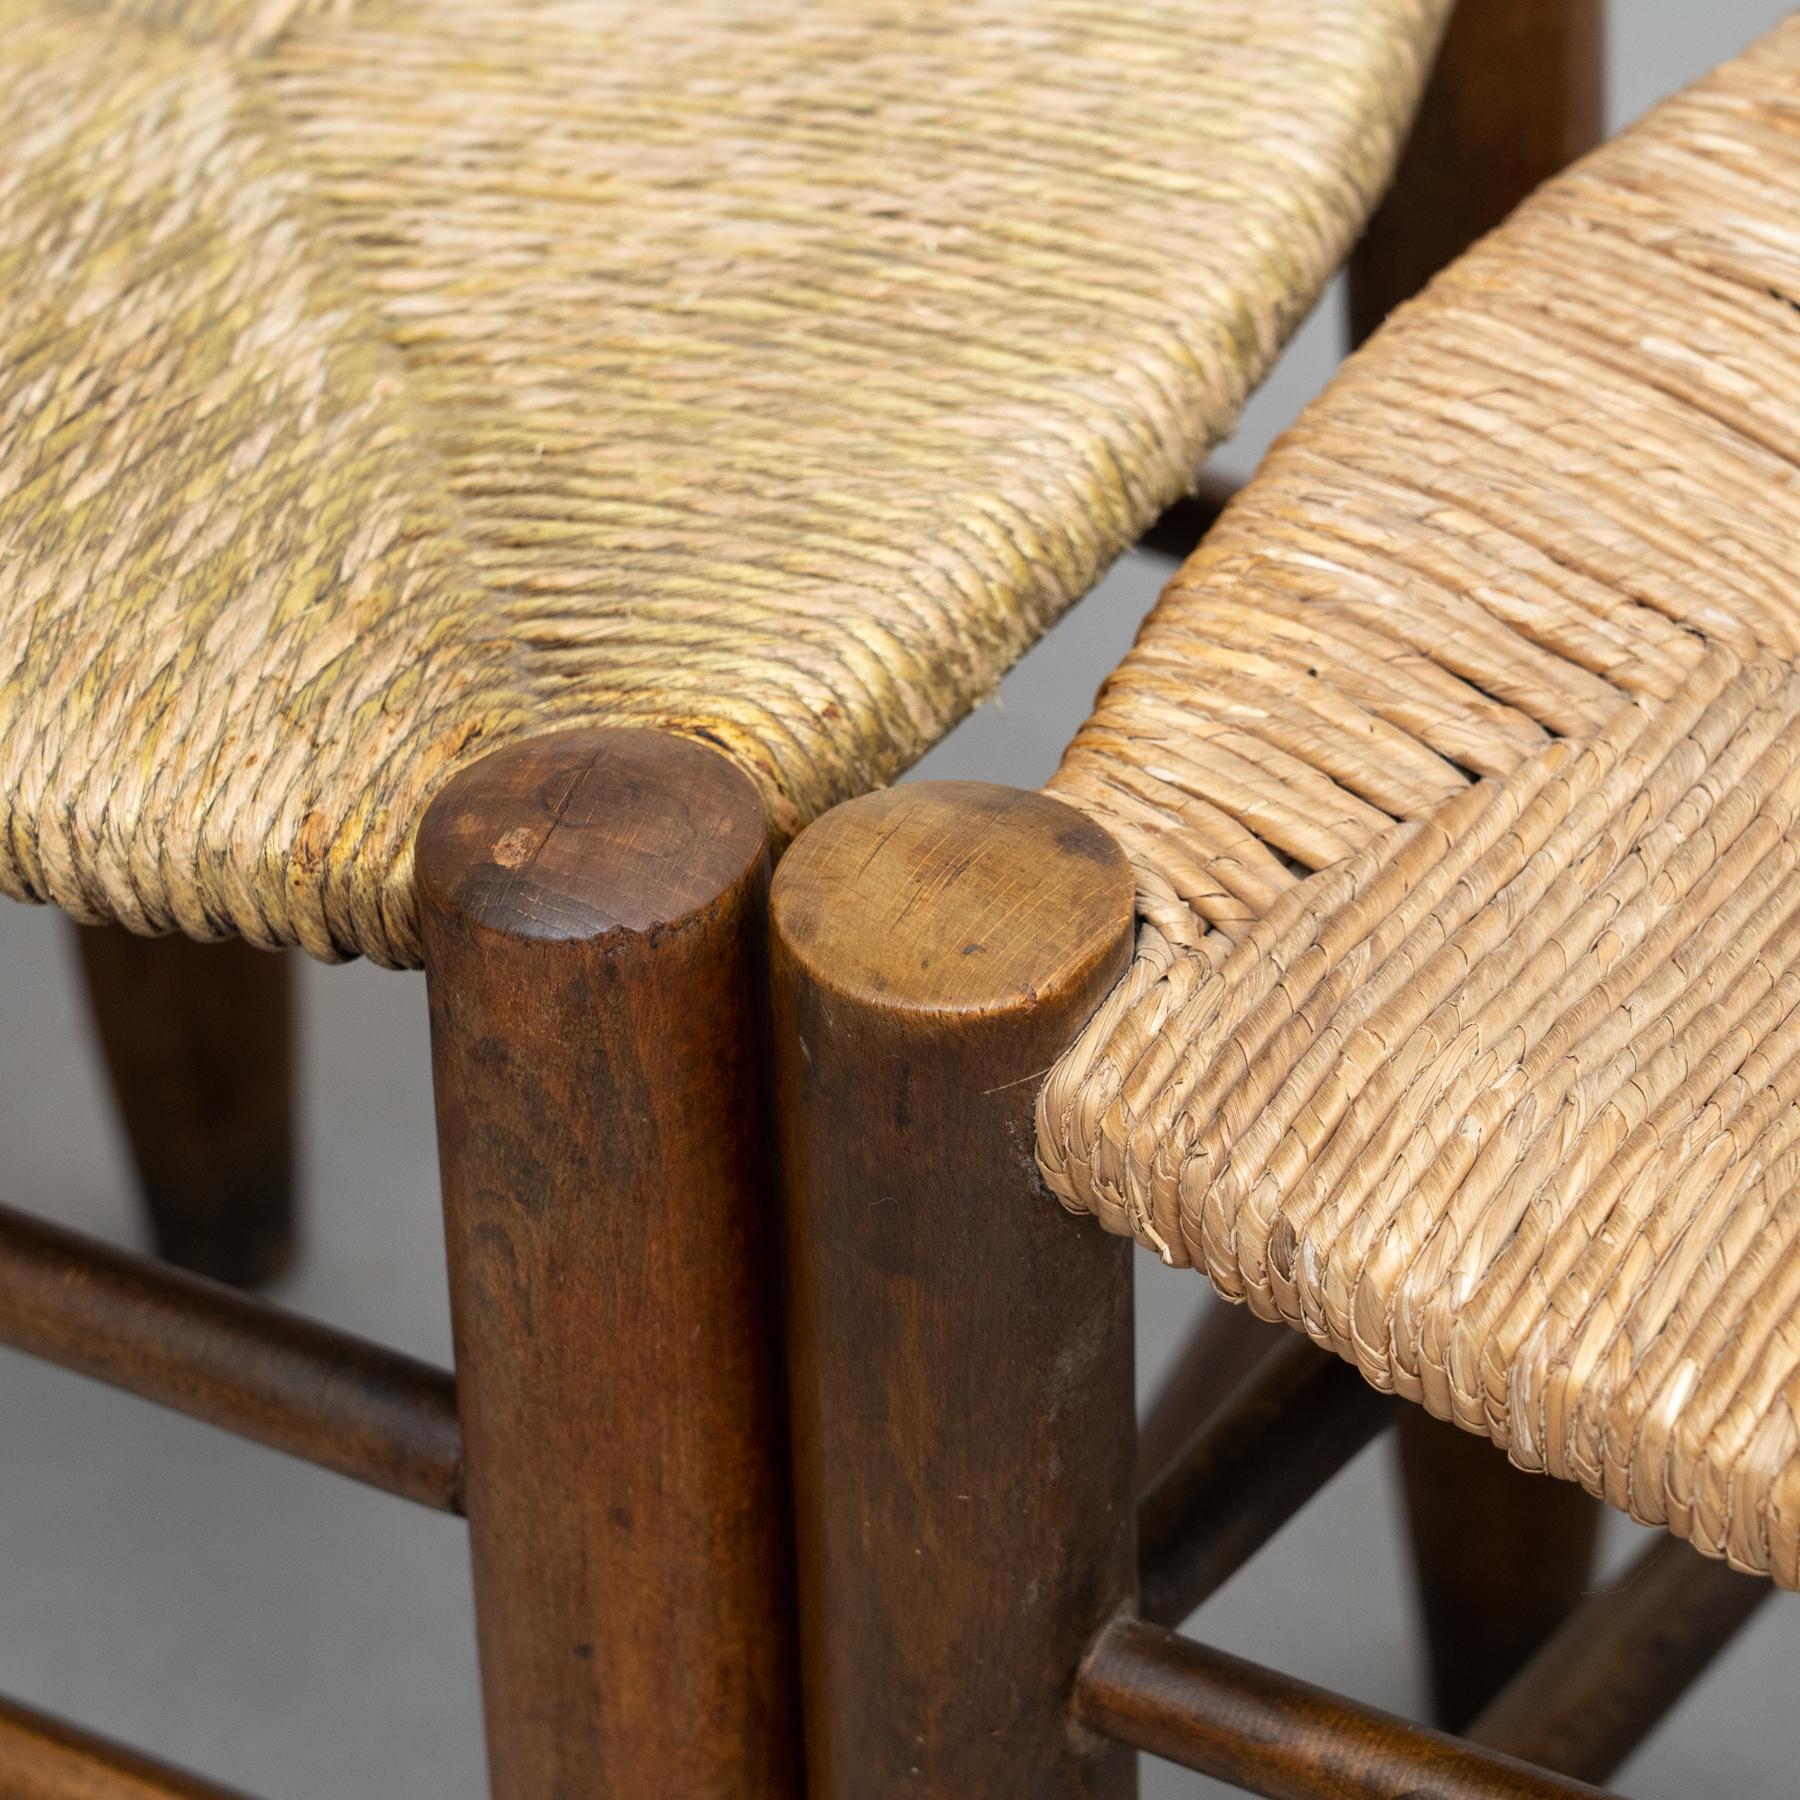 Early 20th century set of two chairs. Wooden chairs with a traditional rattan seat.

In good original condition, with minor wear consistent with age and use, preserving a beautiful patina.

Materials:
Wood
Rattan

Dimensions:
D 44.5 cm x W